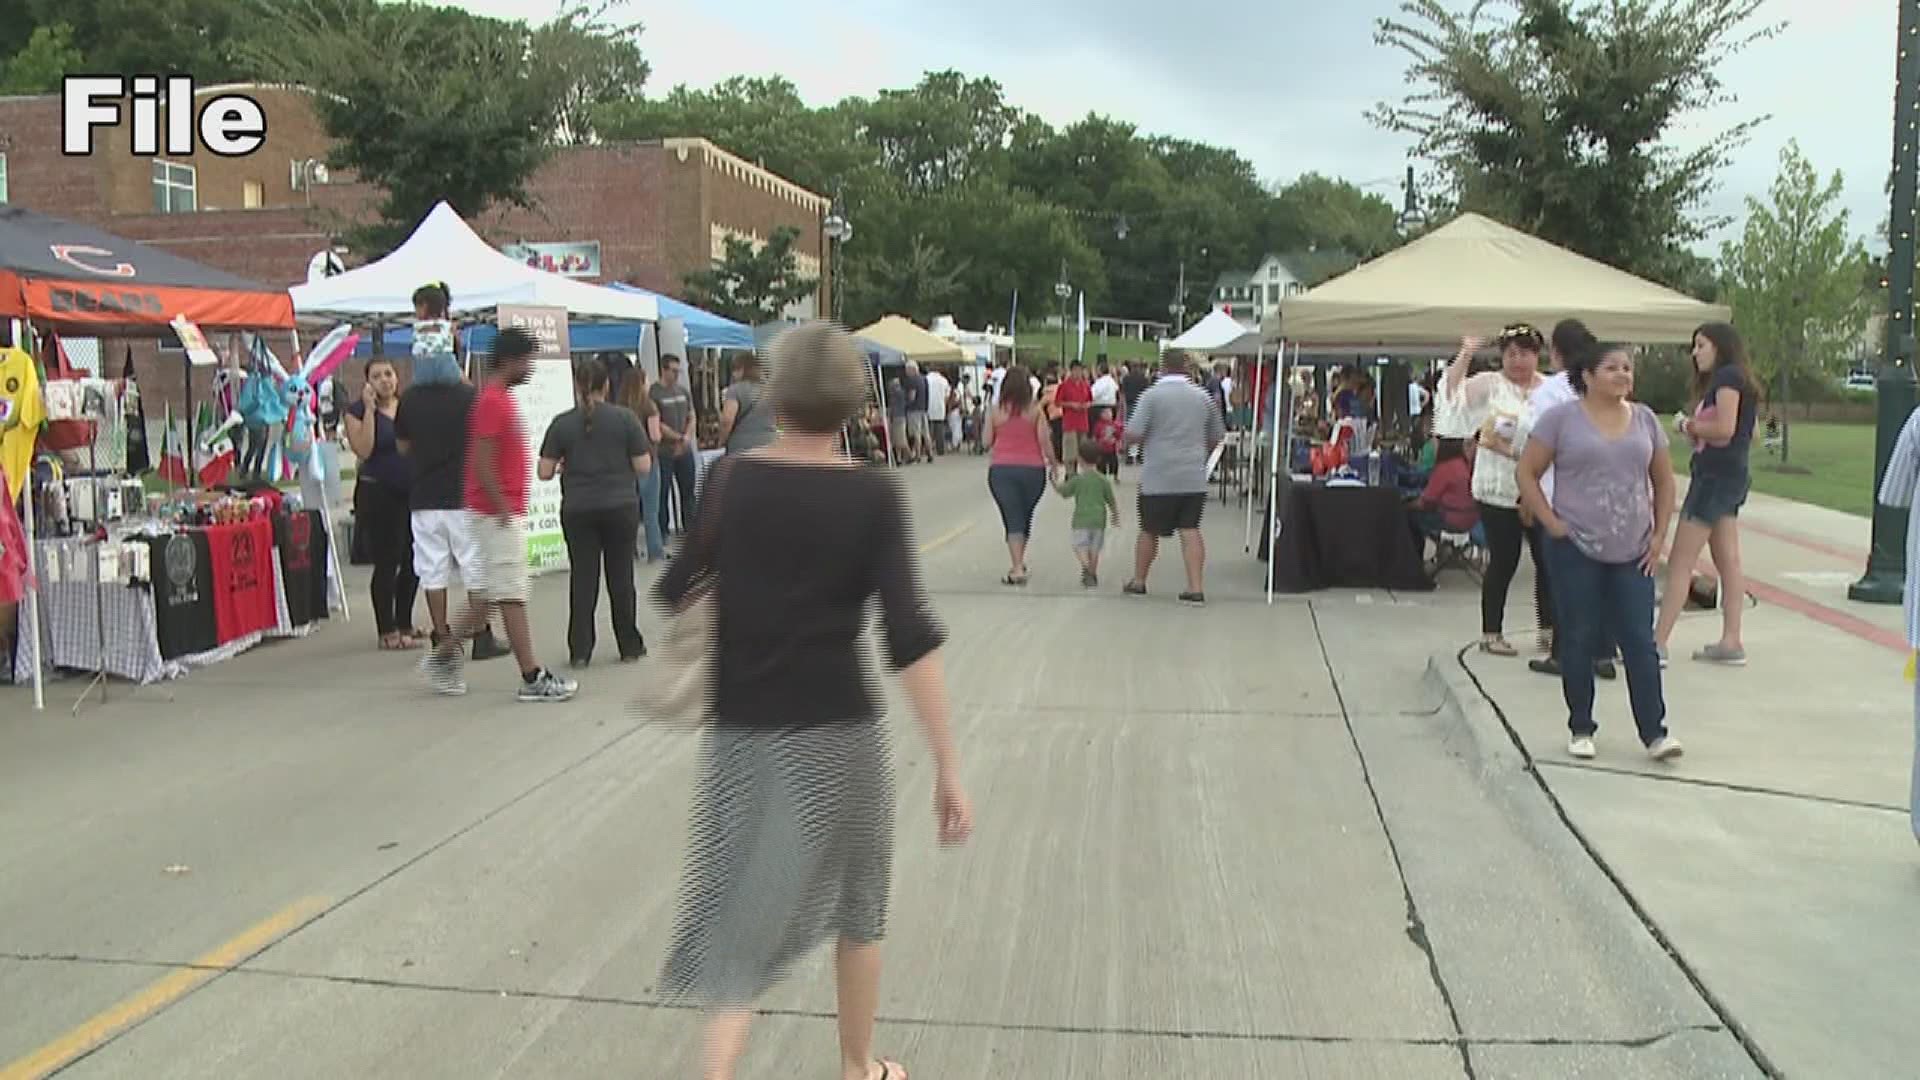 This season kicks off in Moline's Floriciente neighborhood on June 4th and on the Davenport riverfront on June 12th.